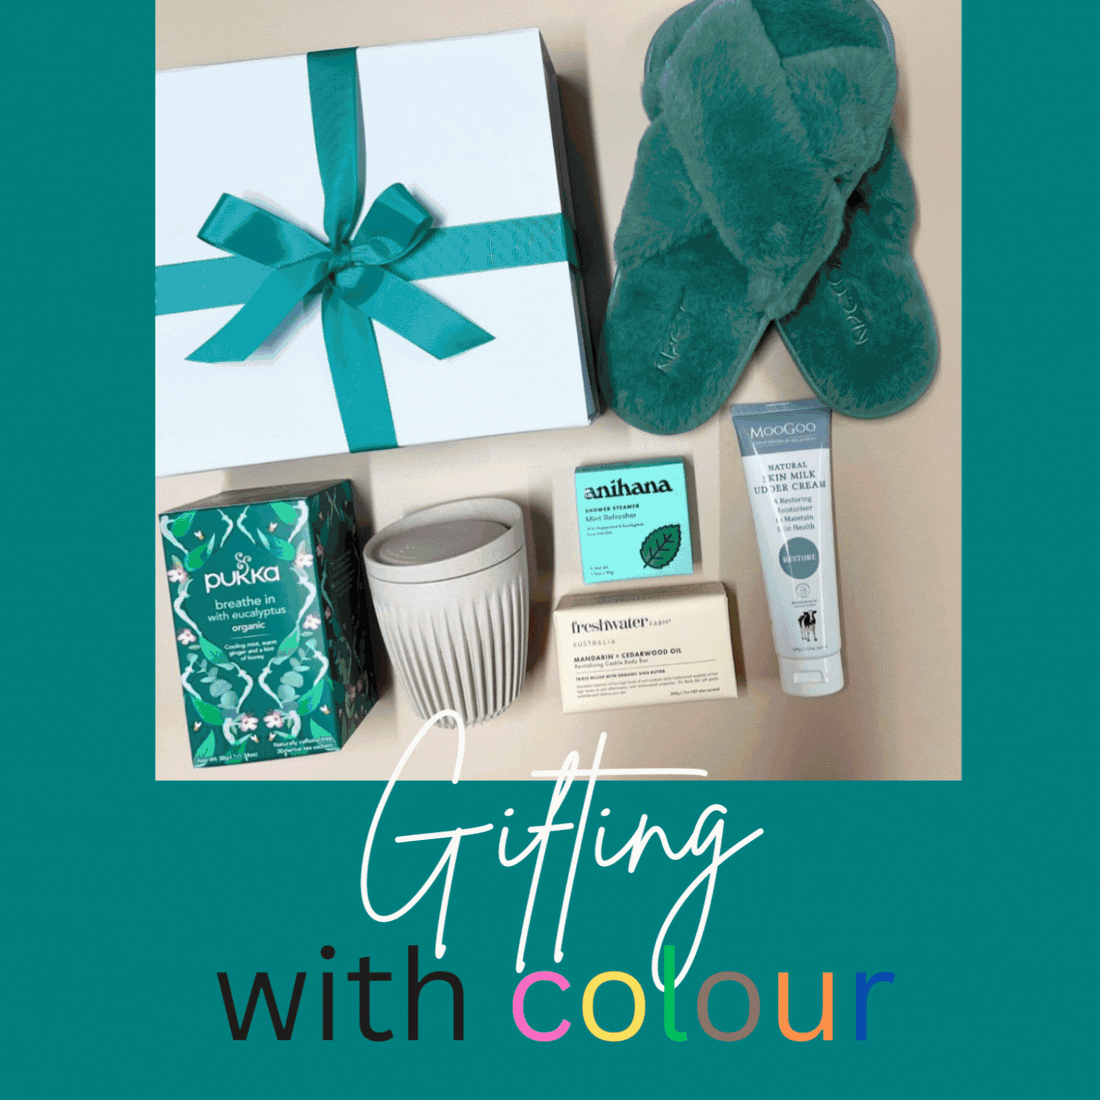 Use the power of colour for your gift